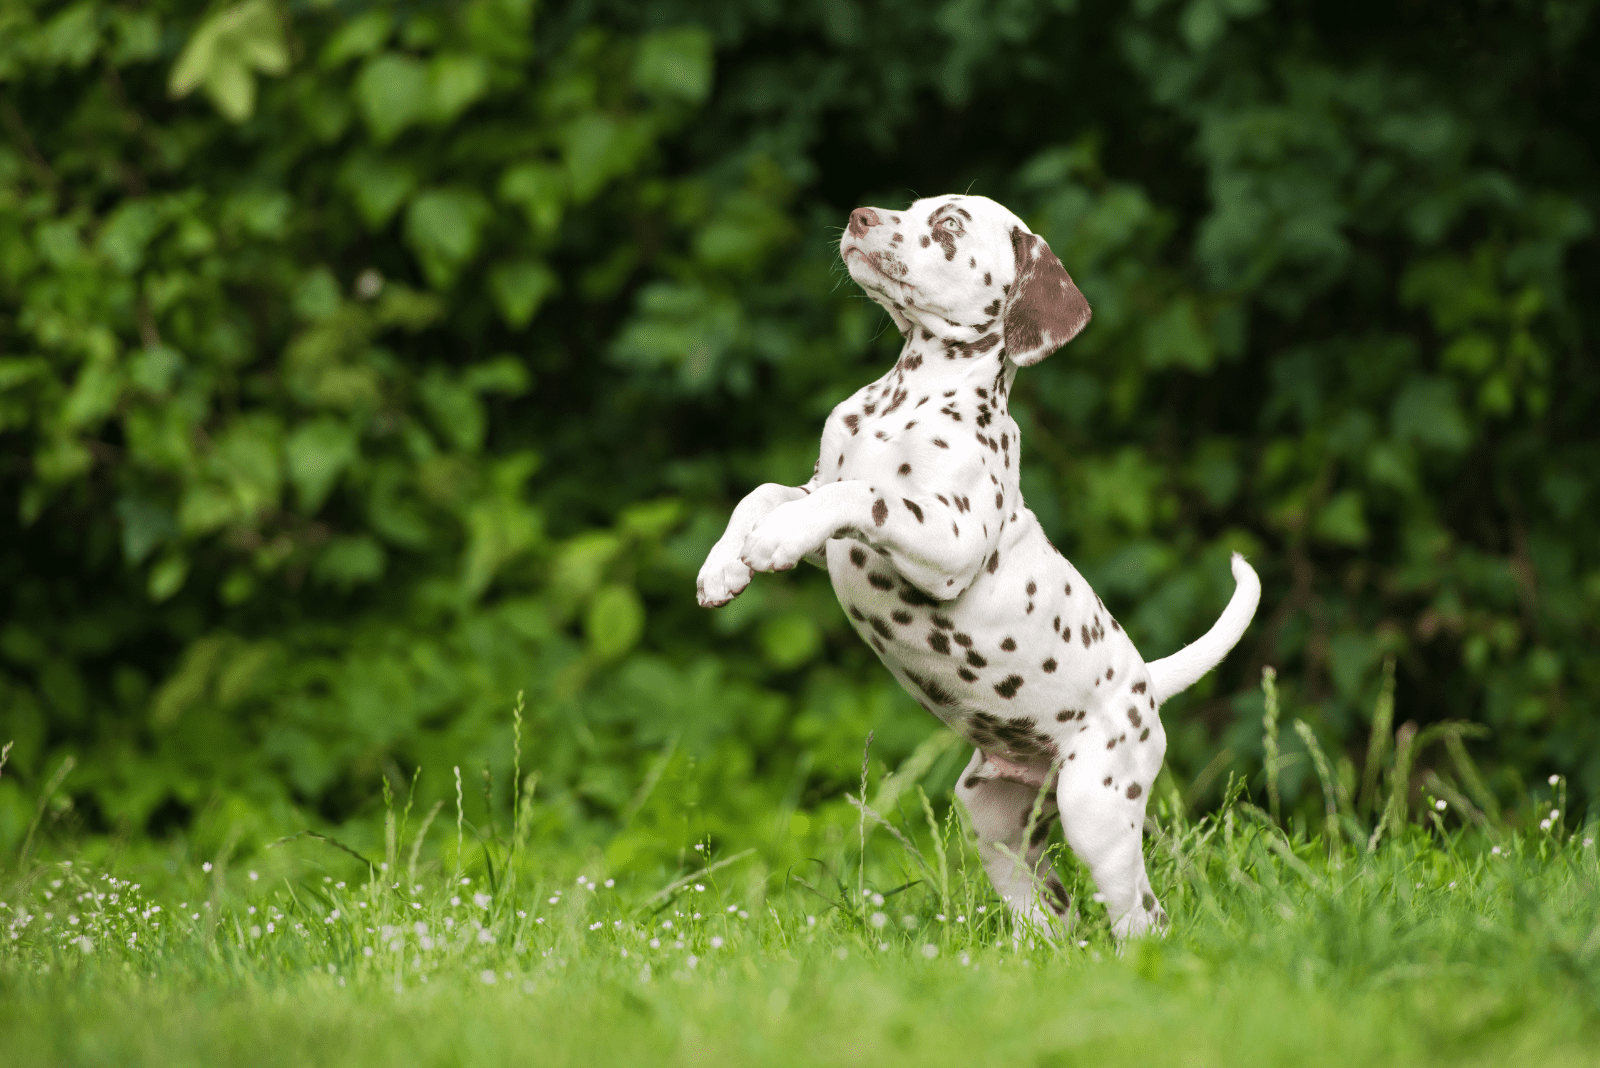 Dalmatian plays on the grass